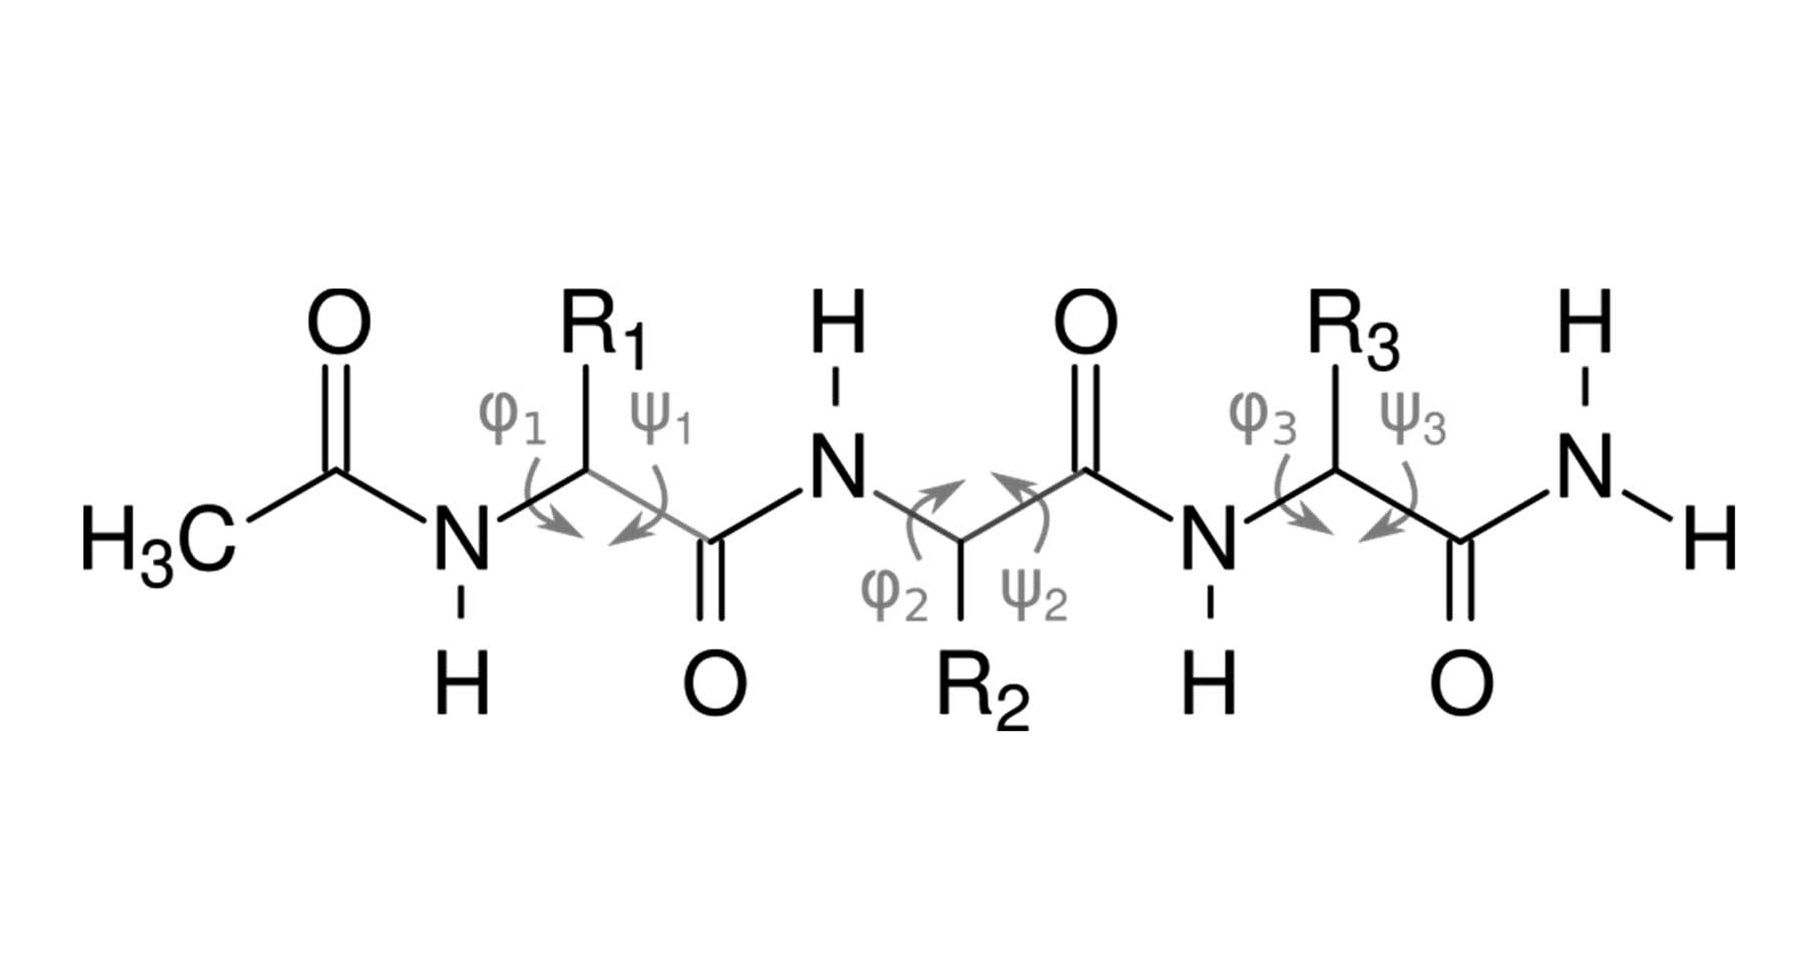 - **Photo:** N-Acetylated tripeptides used for the calculations and experiments, with the main chain dihedral angles (φ and ψ) highlighted. Adapted from: Osifová, Z.; Kalvoda, T.; Galgonek, J.; Culka, M.; Vondrášek, J.; Bouř, P.; Bednárová, L.; Andrushchenko, V.; Dračínský, M.; Rulíšek, L. What are the minimal folding seeds in proteins? Experimental and theoretical assessment of secondary structure propensities of small peptide fragments. *Chem. Sci.* **2024**, 15, 594-608. **Fig. 2**. [https://doi.org/10.1039/D3SC04960D](https://doi.org/10.1039/D3SC04960D). 